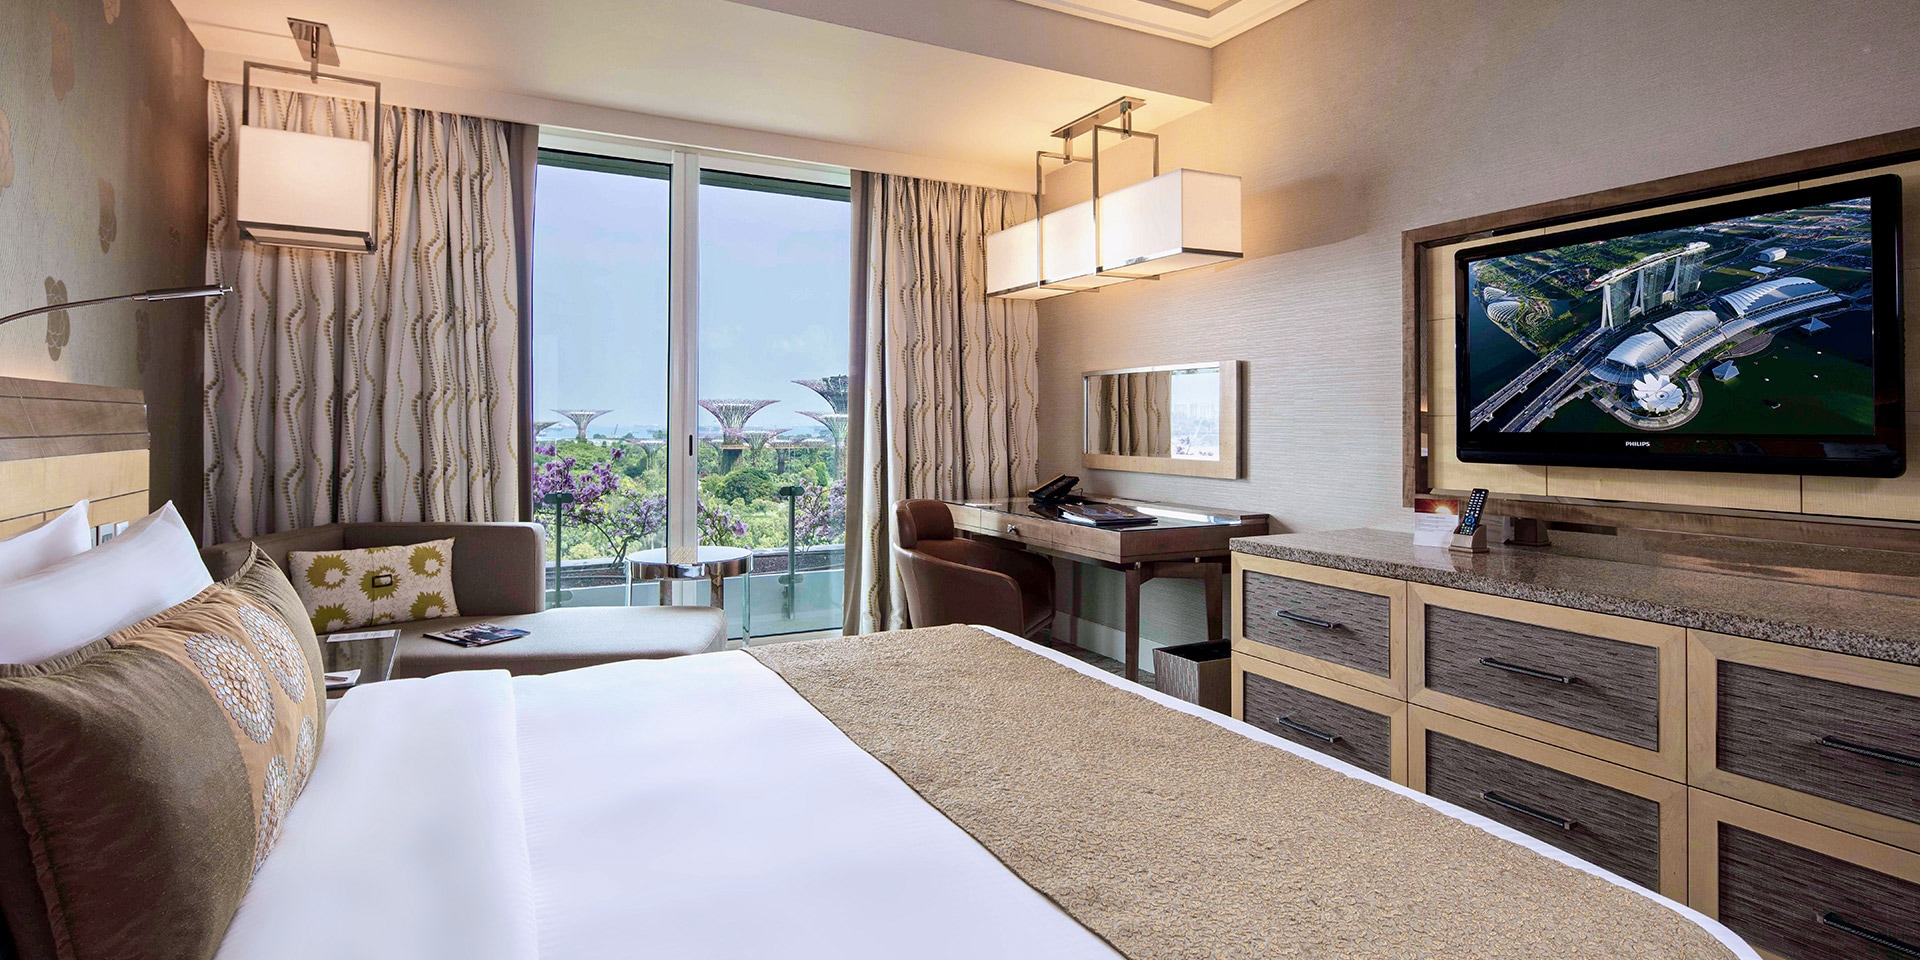 Deluxe Room in Marina Bay Sands with King Bed and Garden View